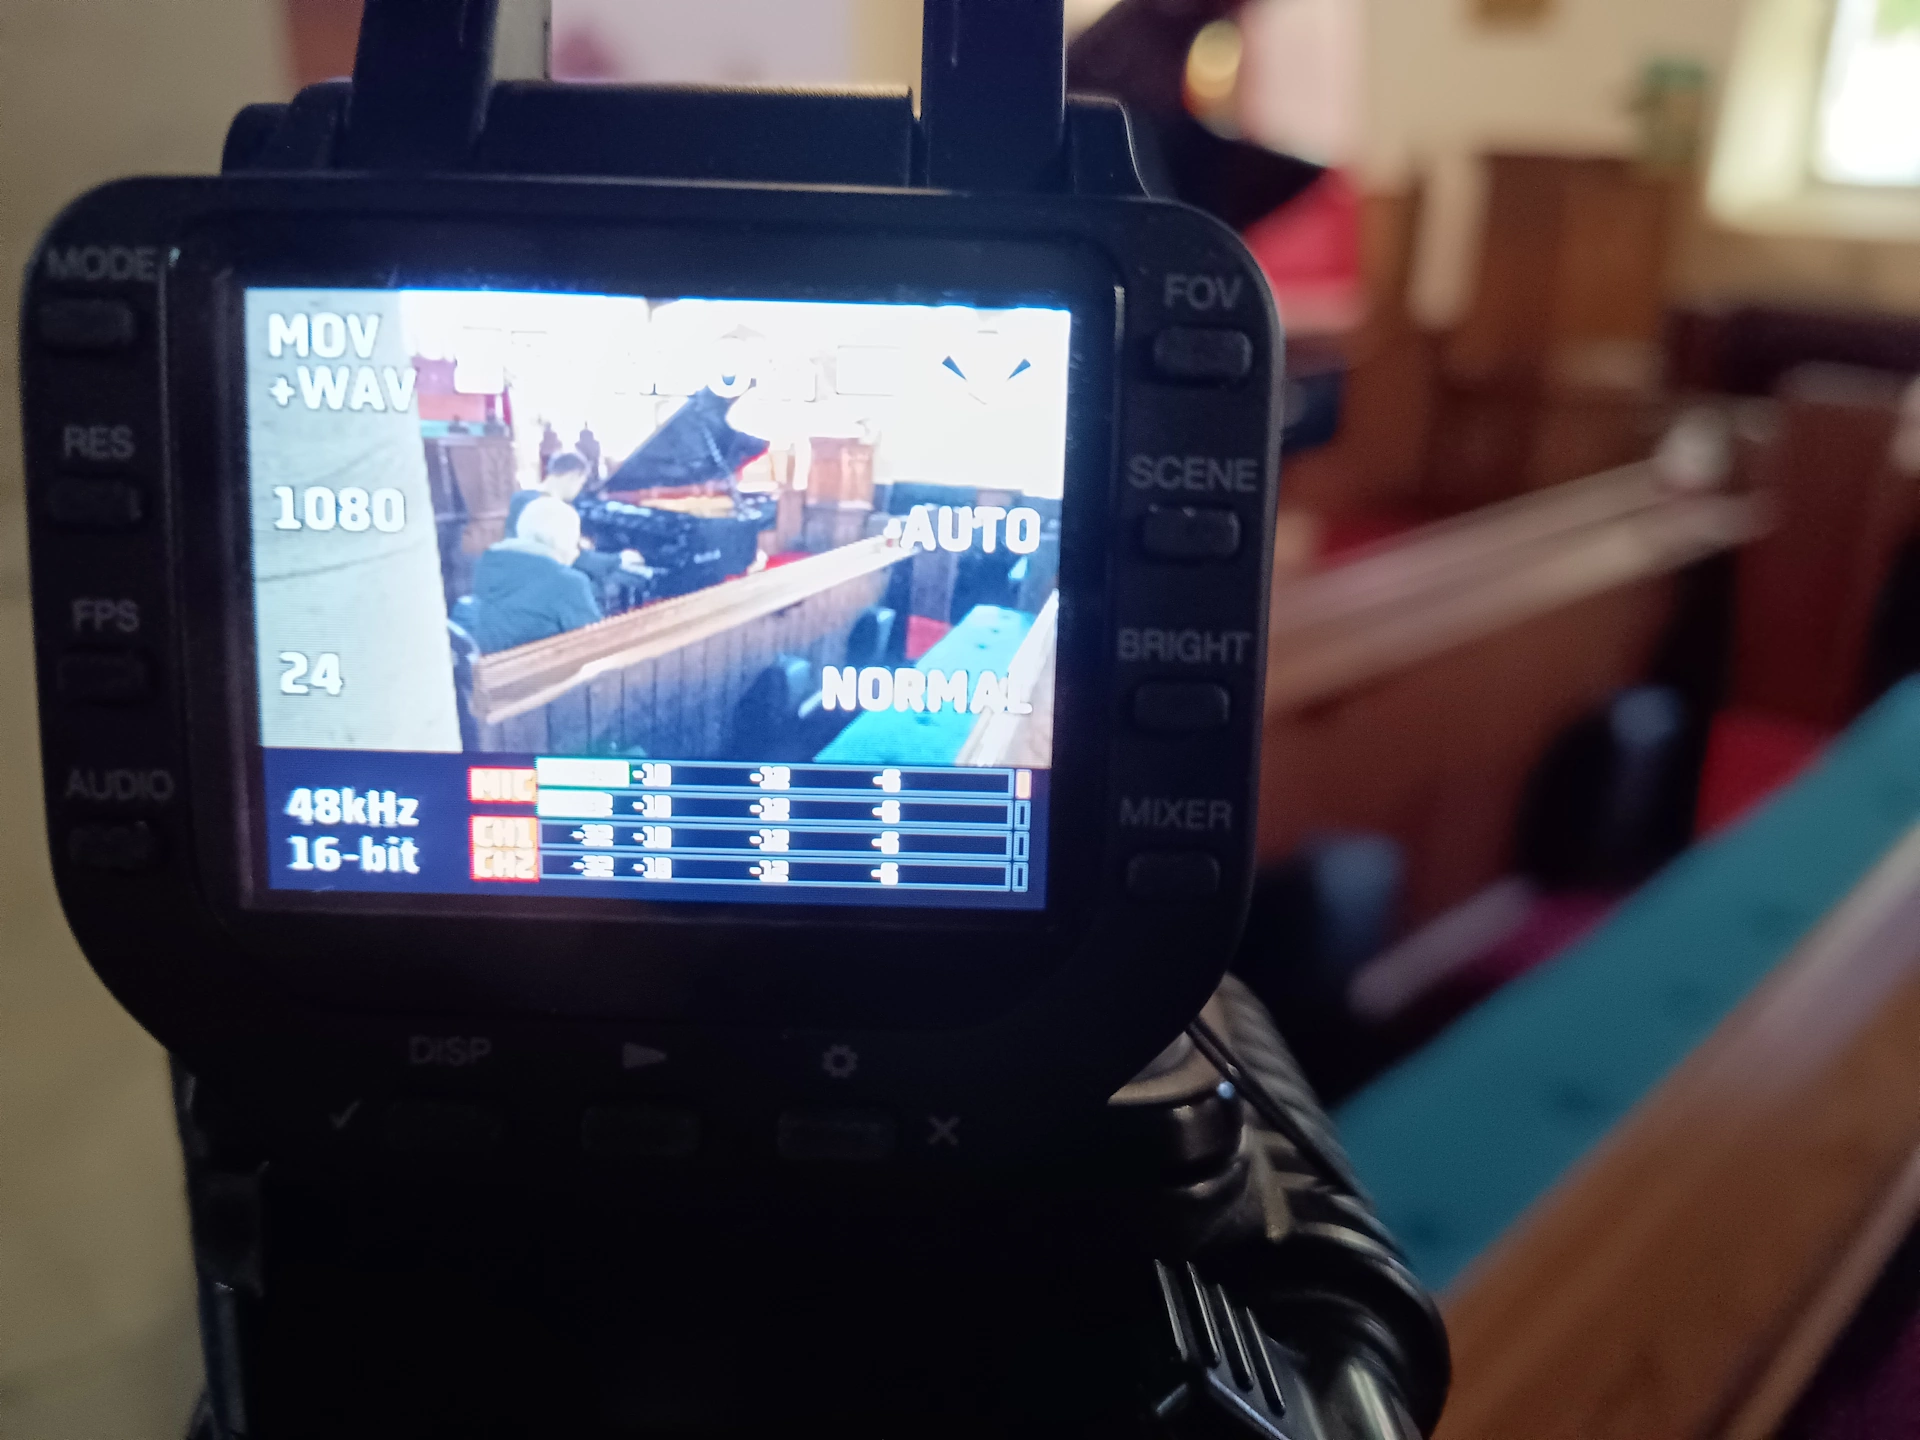 A shot of a video recorder screen showing Ethan at the piano